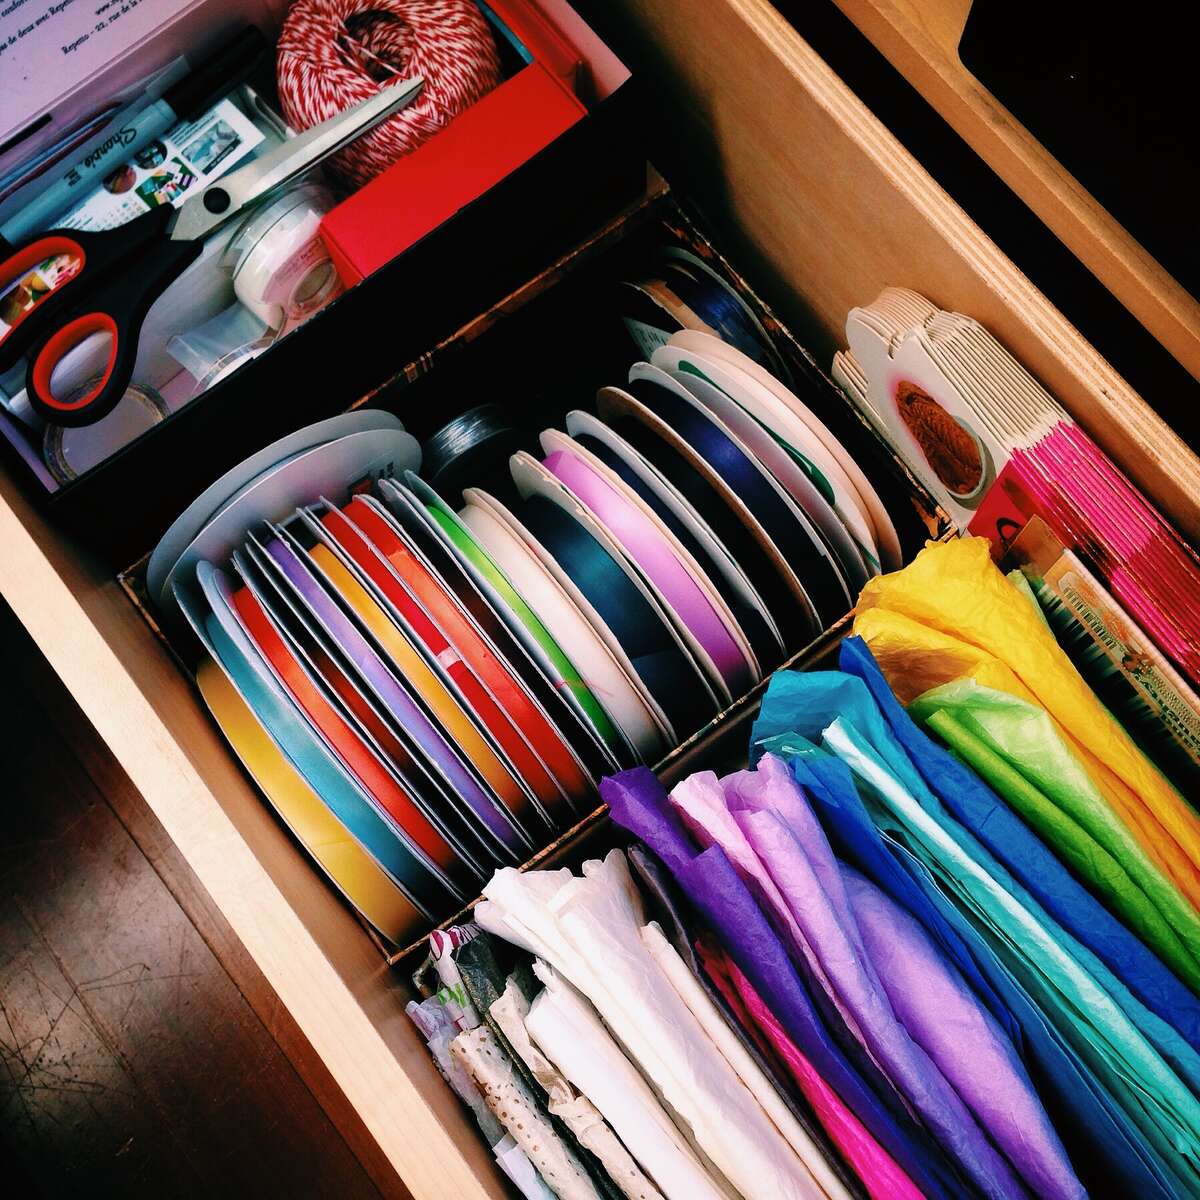 Organizational progress is afoot! Kondo says, “Store all items of the same type in the same place and don’t scatter storage space.”